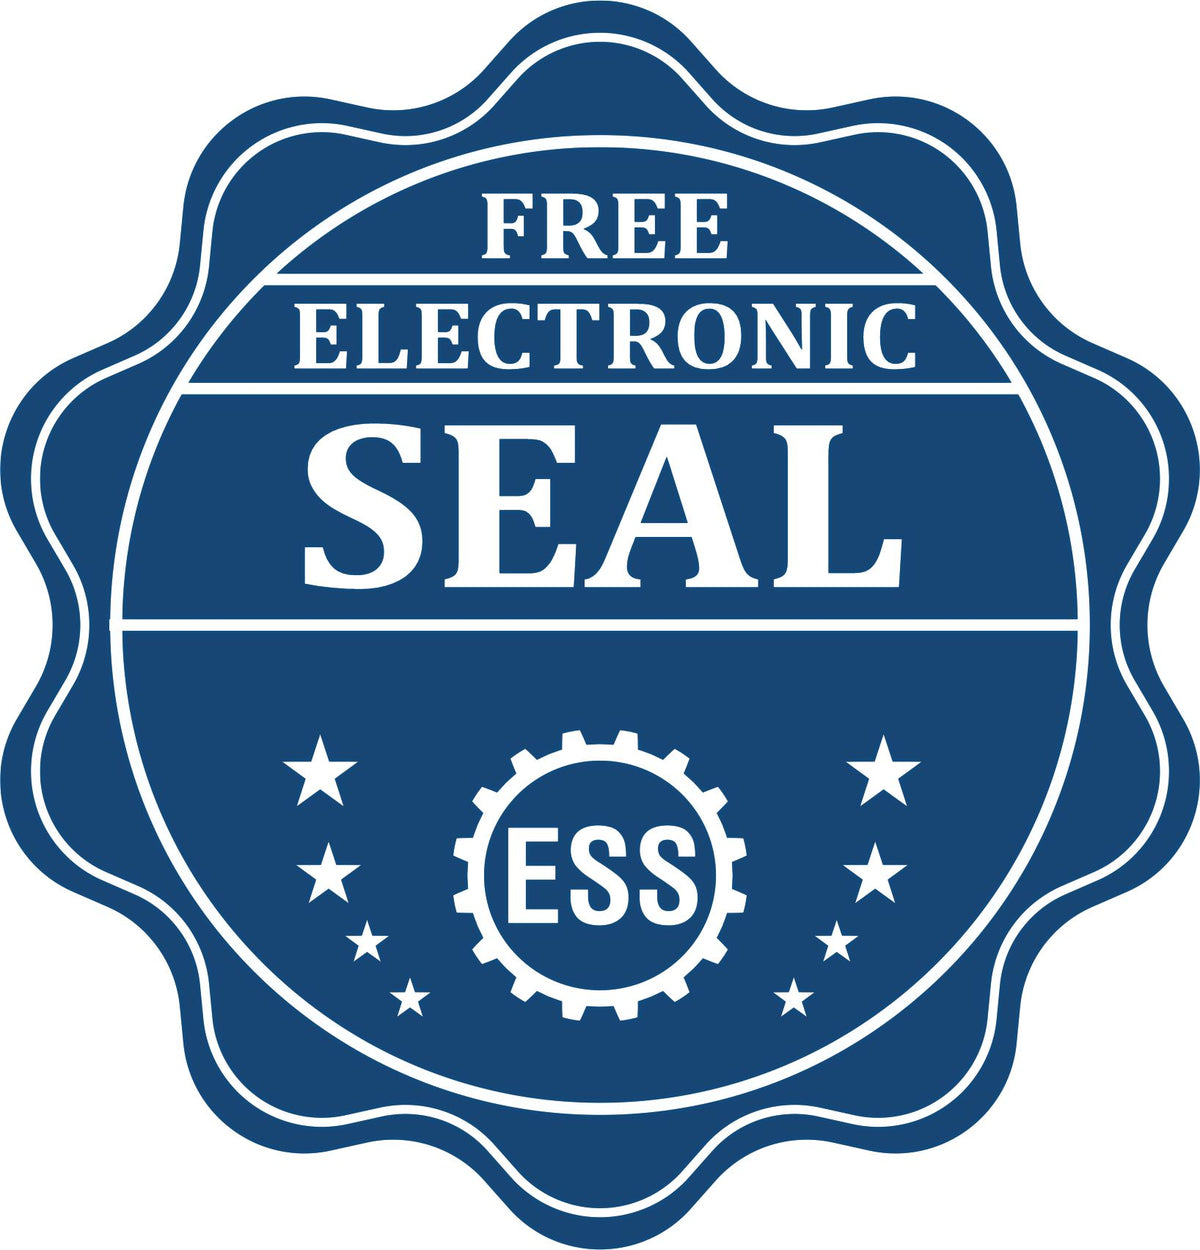 A badge showing a free electronic seal for the Premium MaxLight Pre-Inked Minnesota Geology Stamp with stars and the ESS gear on the emblem.